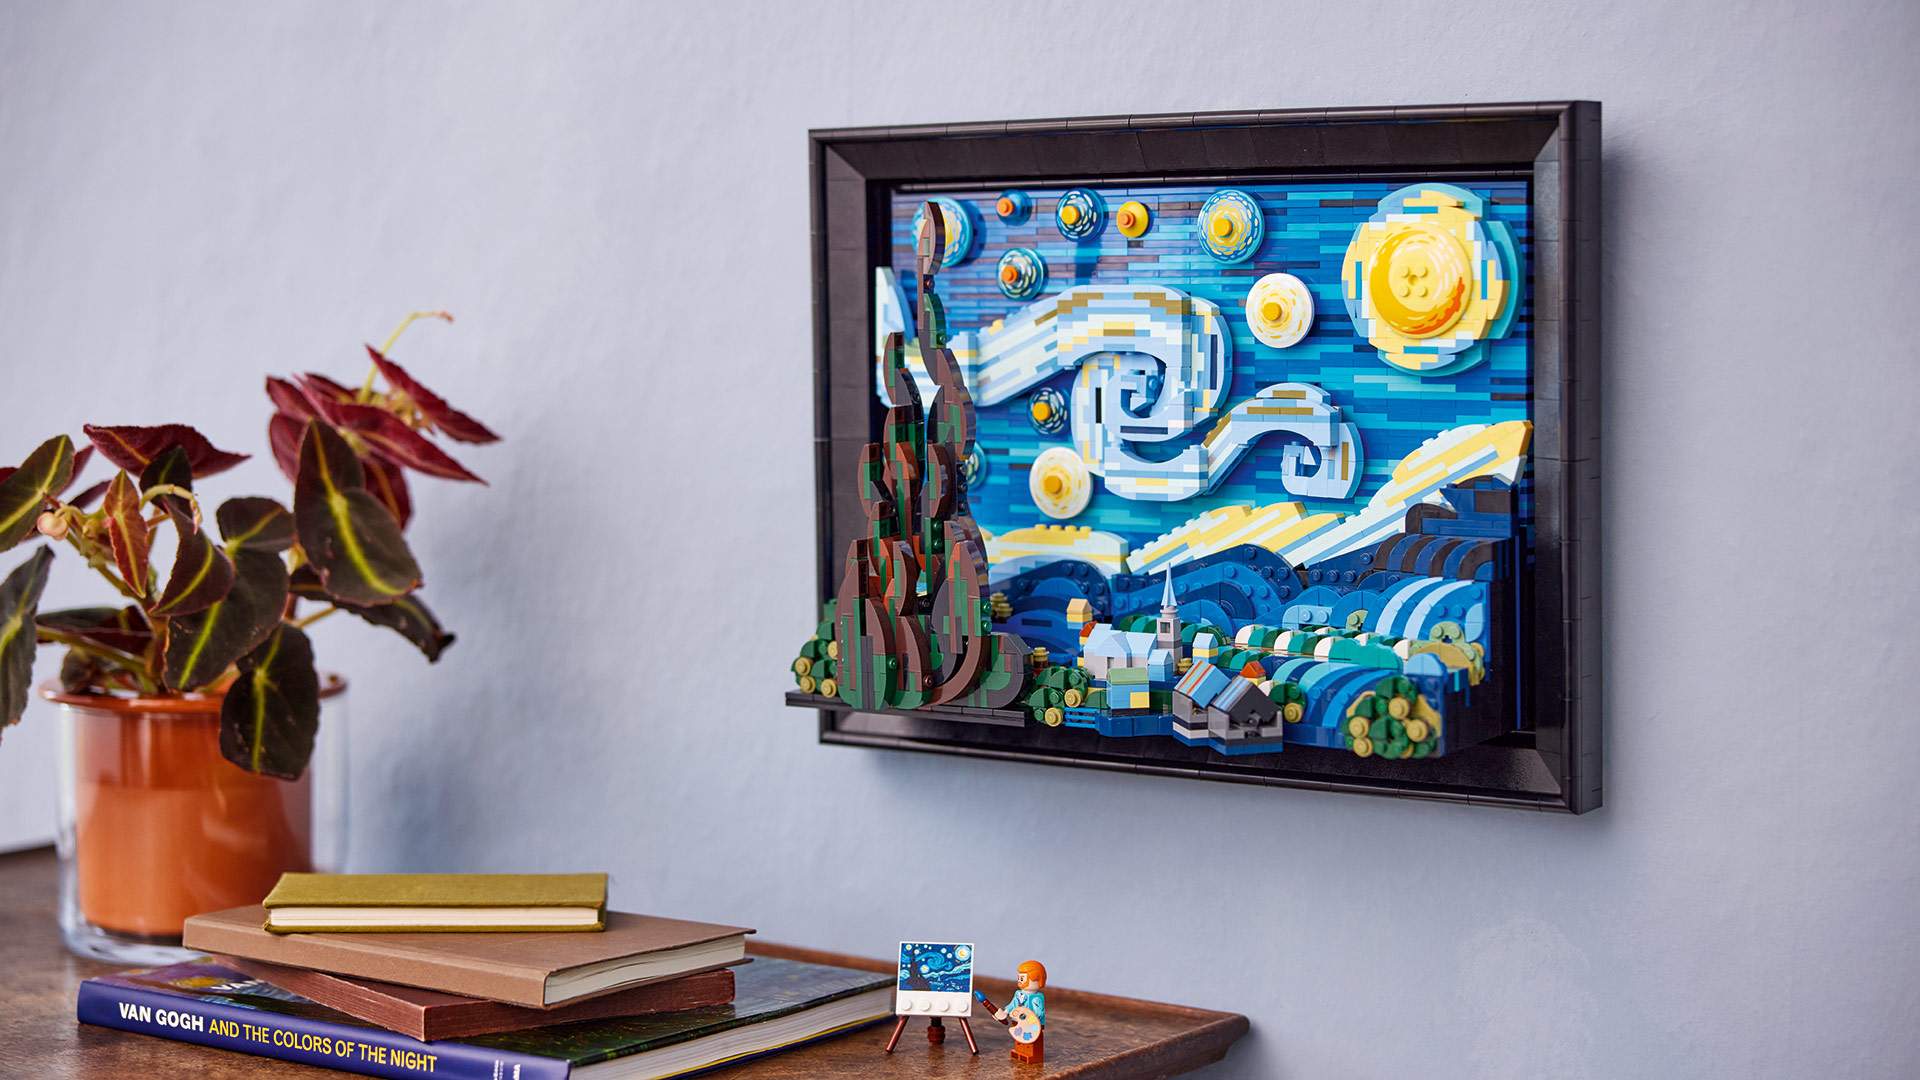 Lego and MoMA's Gorgeous New 'Starry Night' Kit Lets You Make Your Own Van Gogh Masterpiece